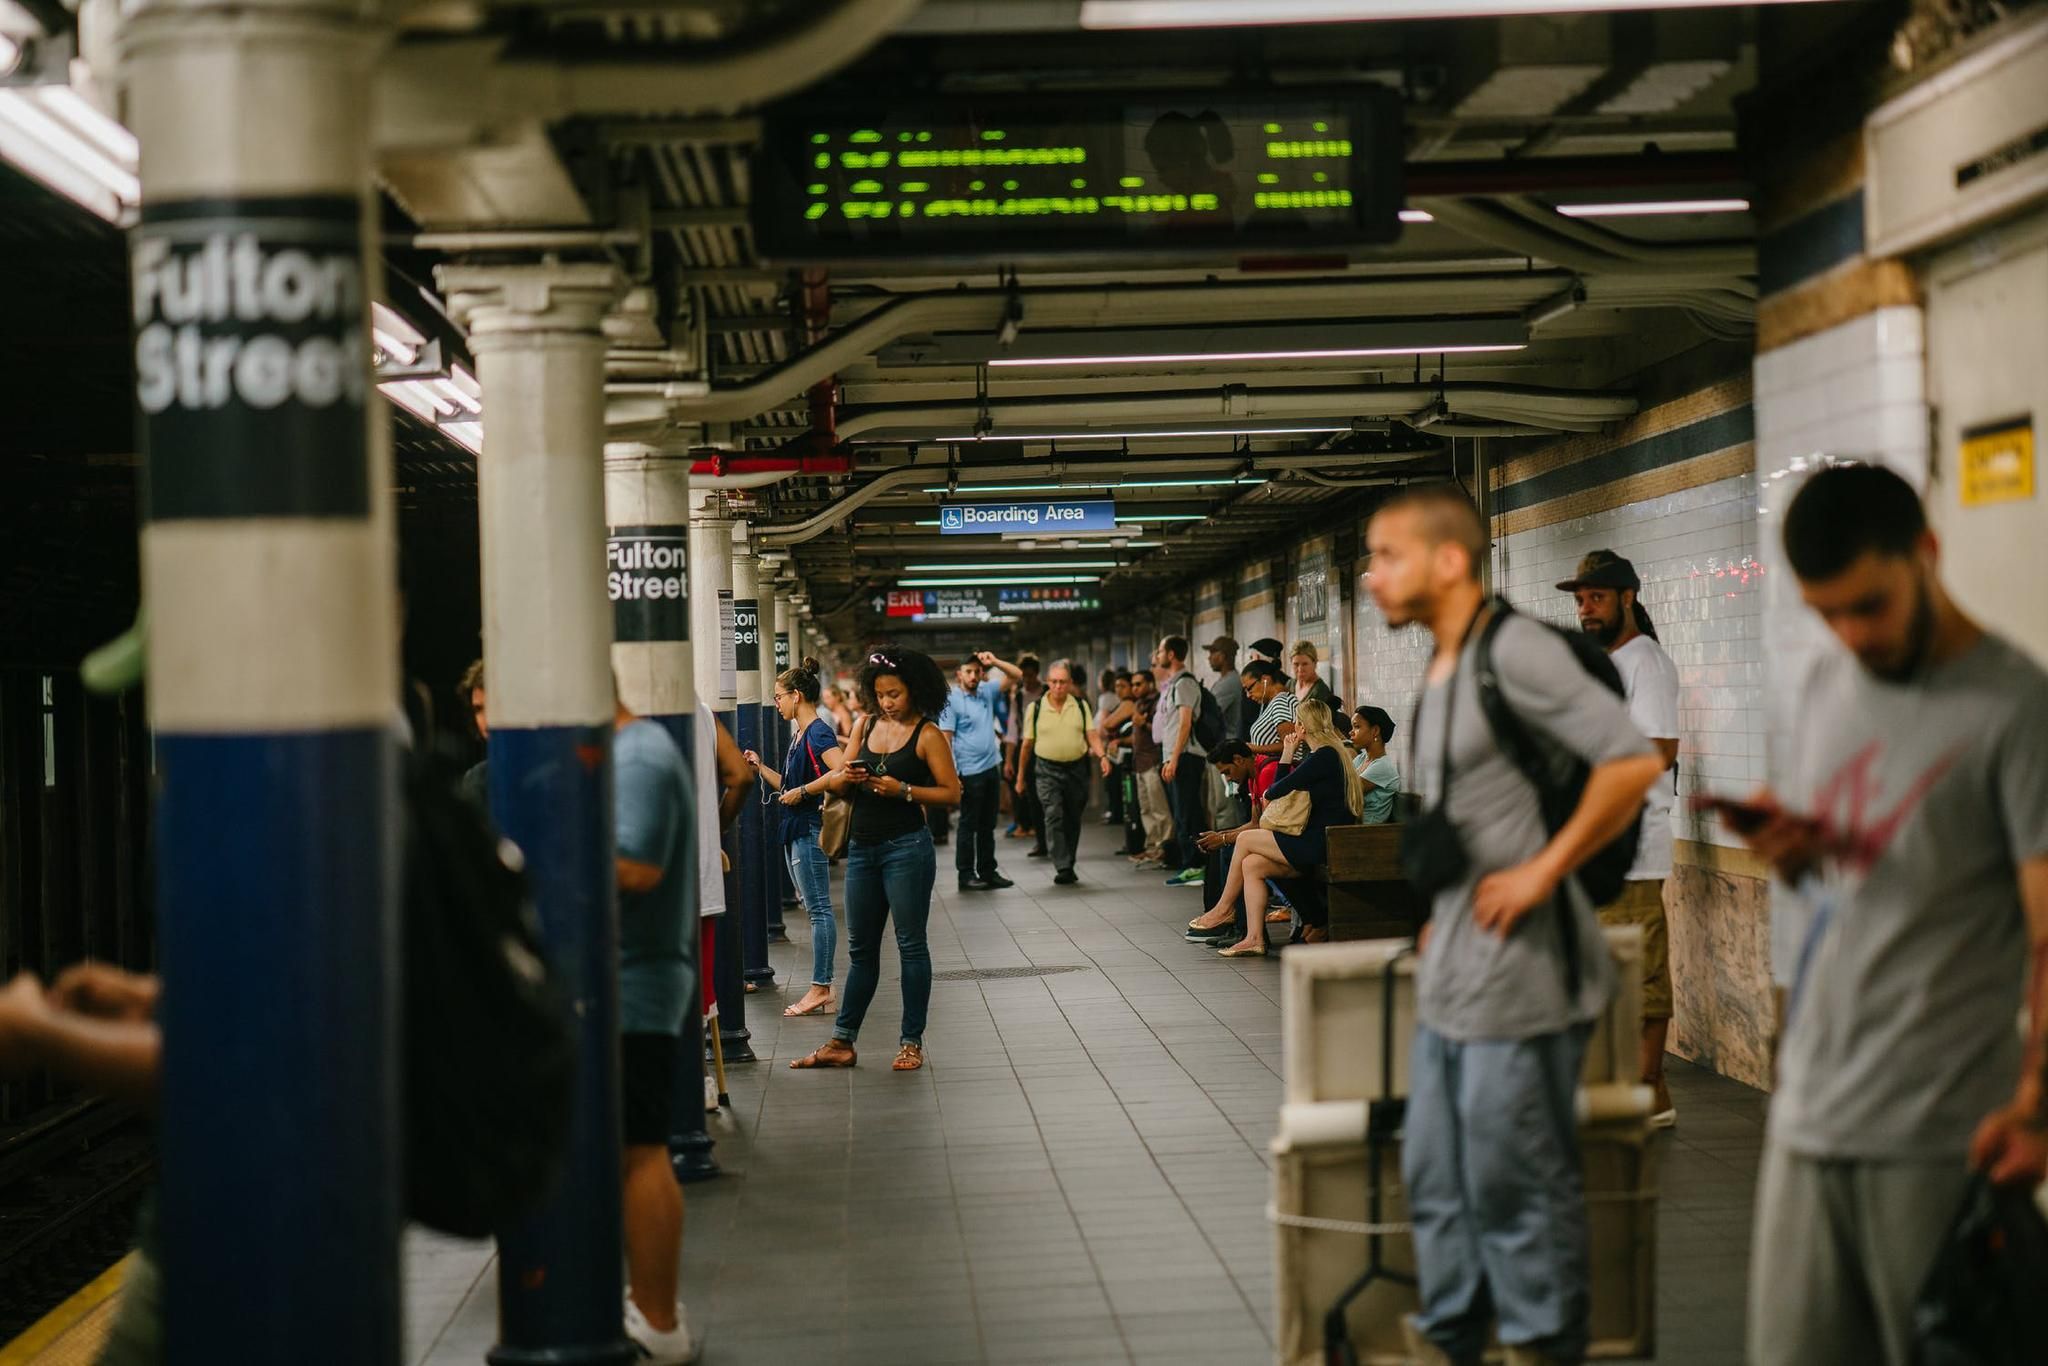 New York plans “historic” $5.2 billion spend to make stations accessible